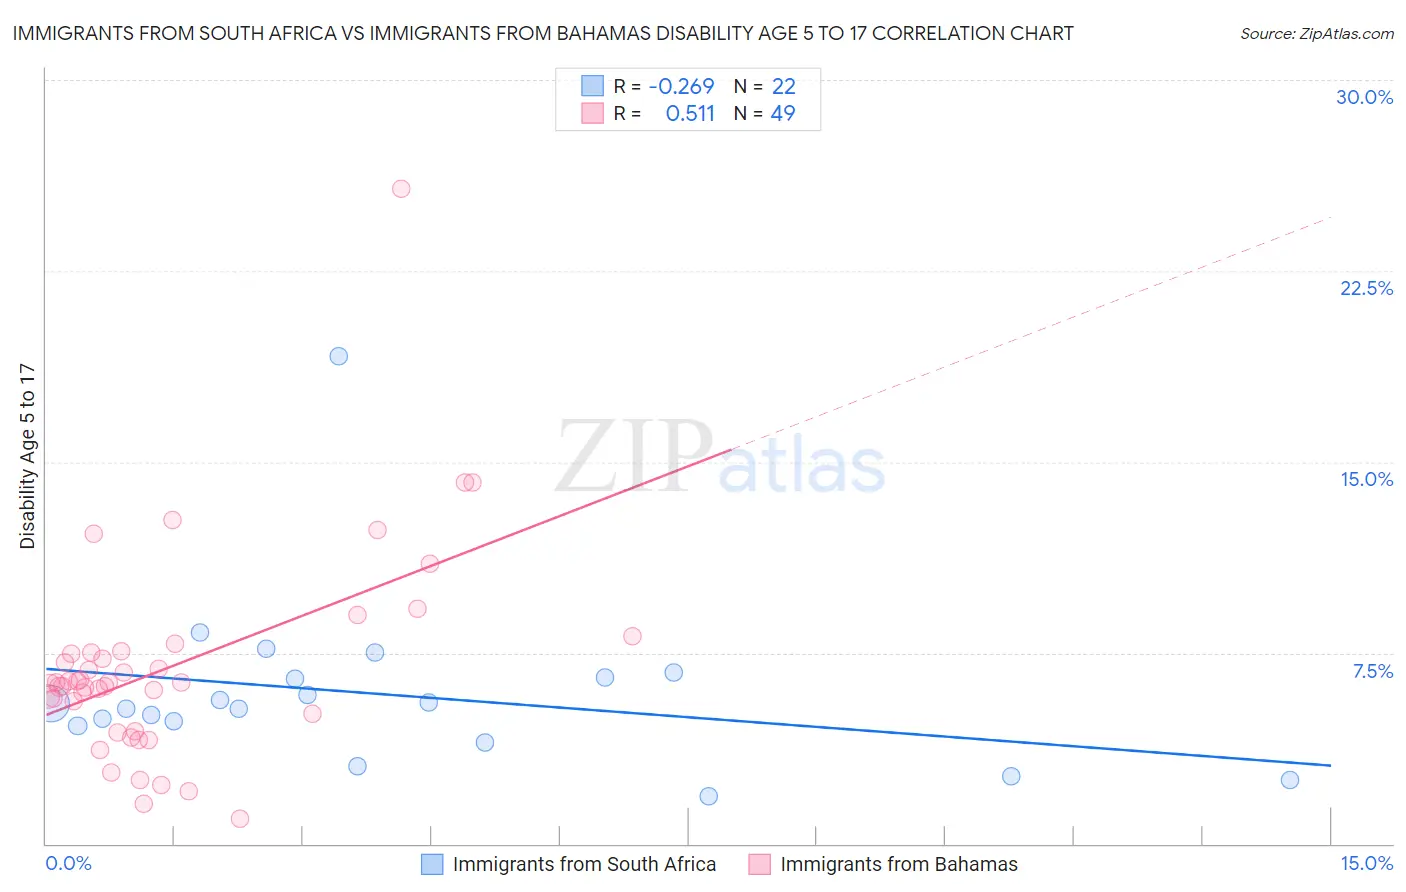 Immigrants from South Africa vs Immigrants from Bahamas Disability Age 5 to 17